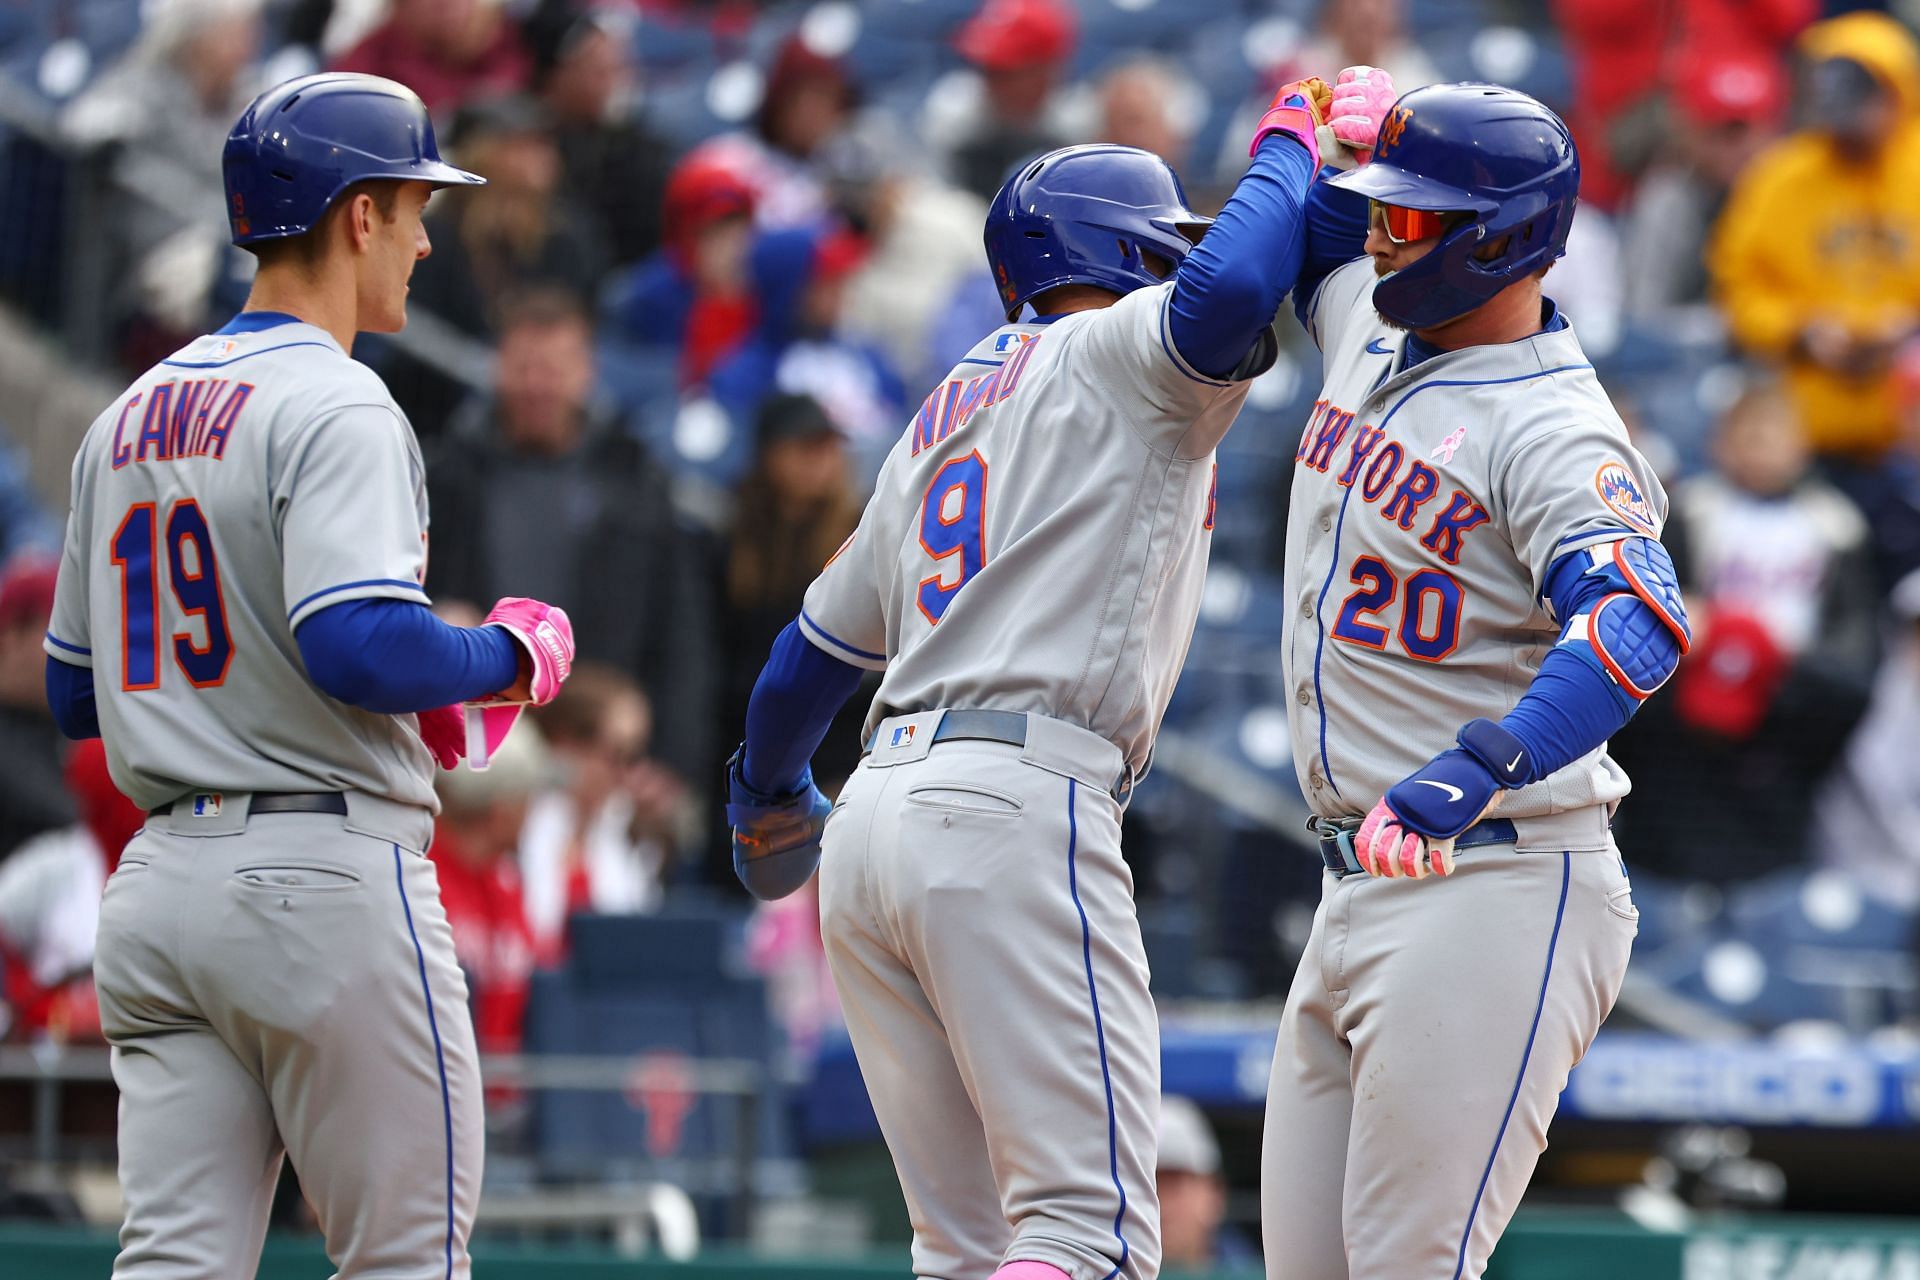 New York Mets slugger Pete Alonso 'all-in' to defend Home Run